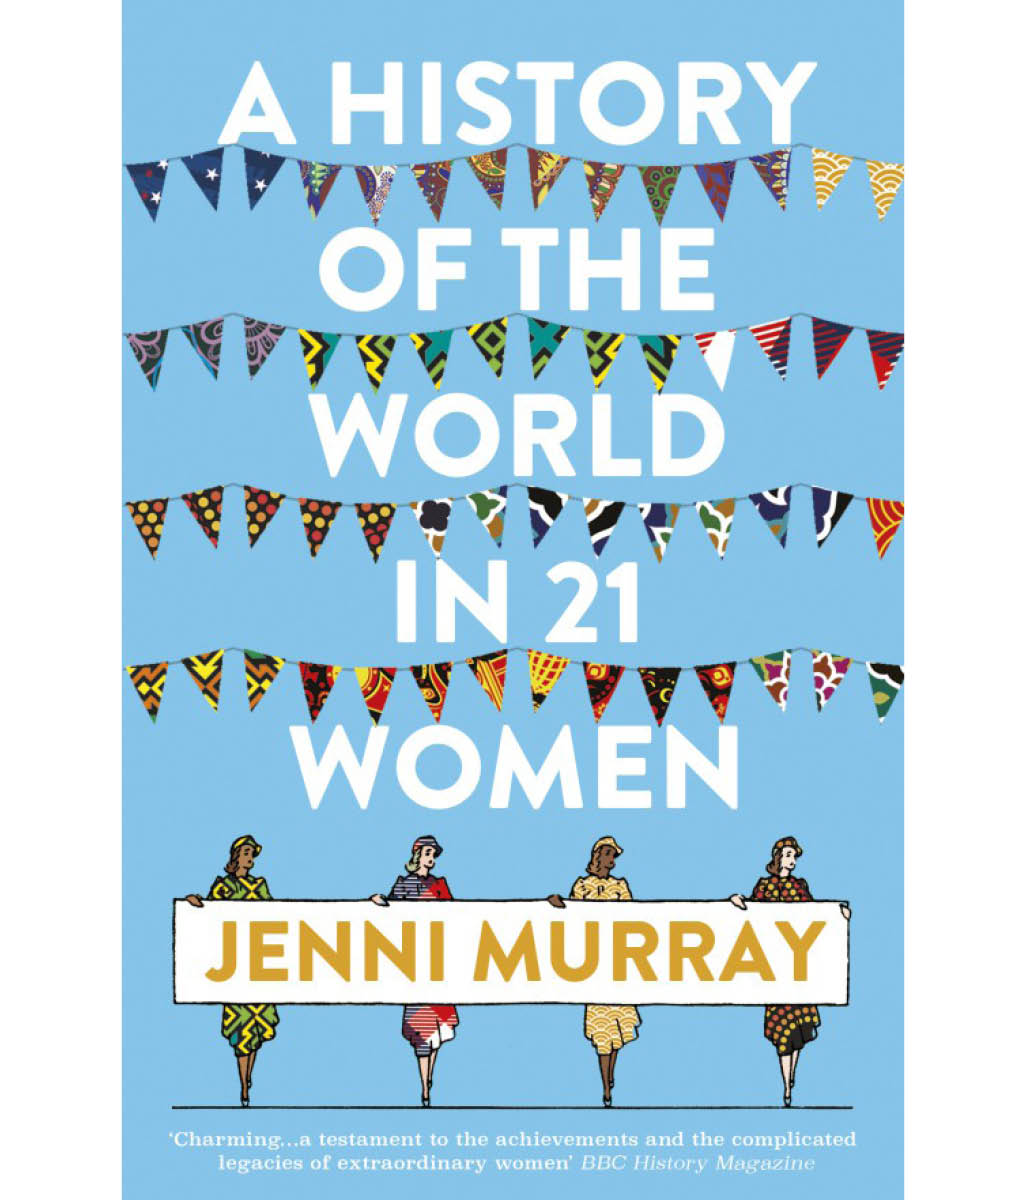 A history of the world in 21 Women Jenni Murray